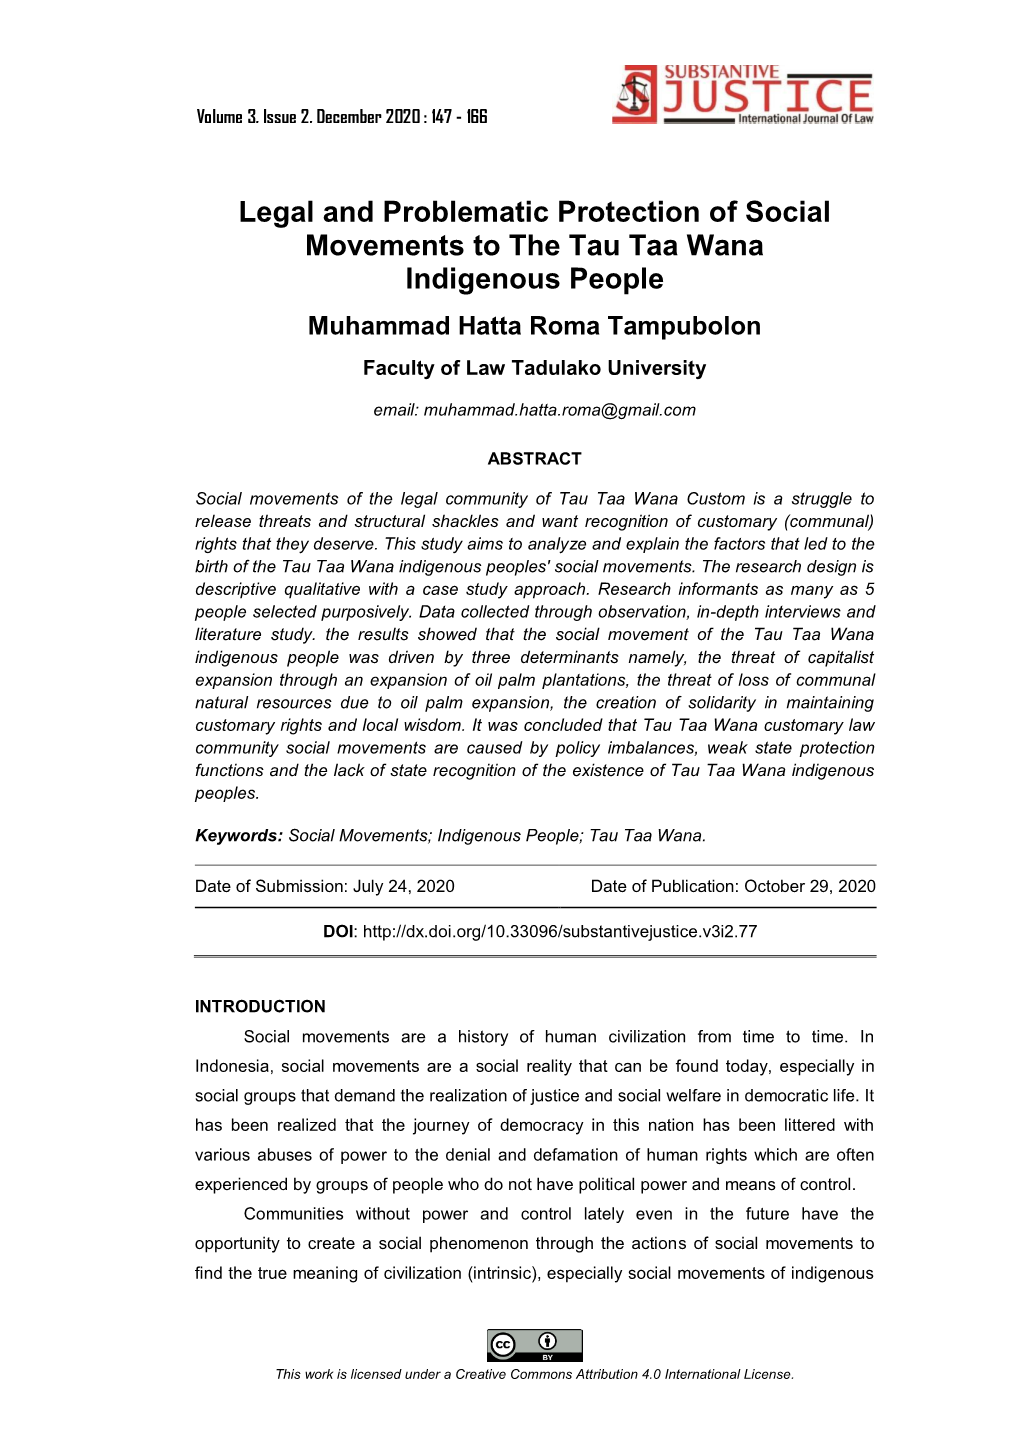 Legal and Problematic Protection of Social Movements to the Tau Taa Wana Indigenous People